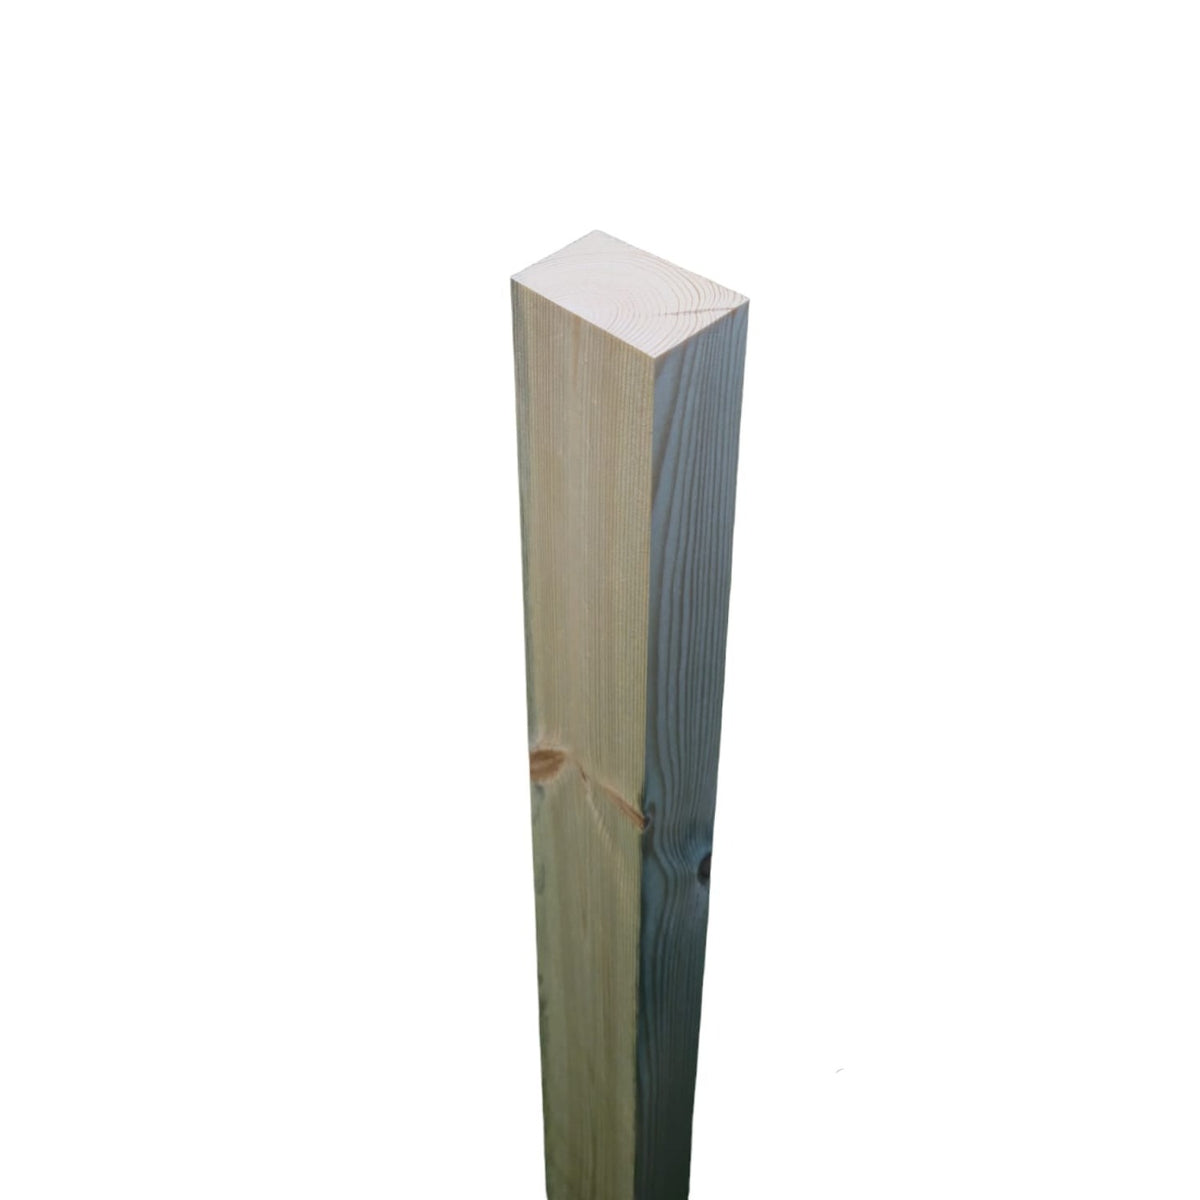 A softwood wall post measuring 95mm x 45mm